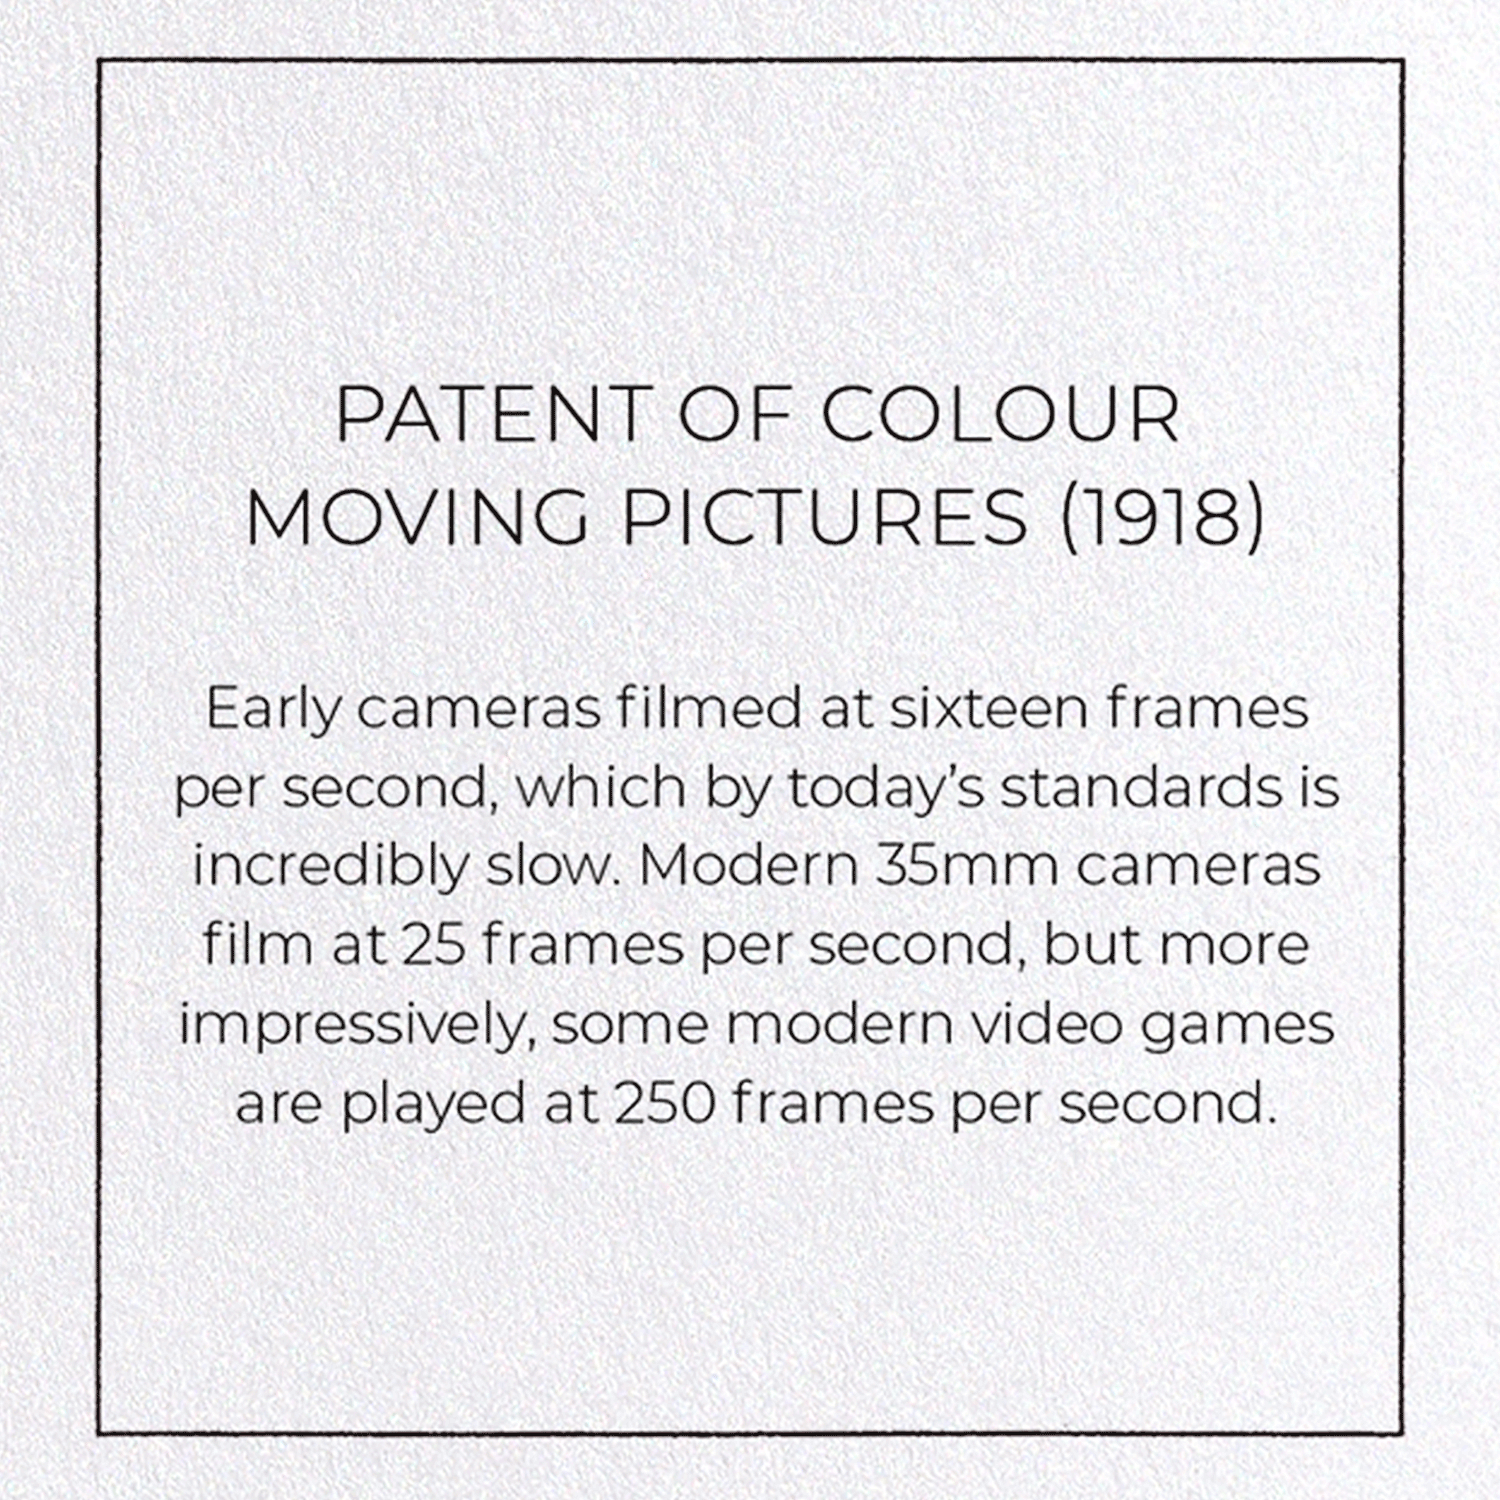 PATENT OF COLOUR MOVING PICTURES (1918)